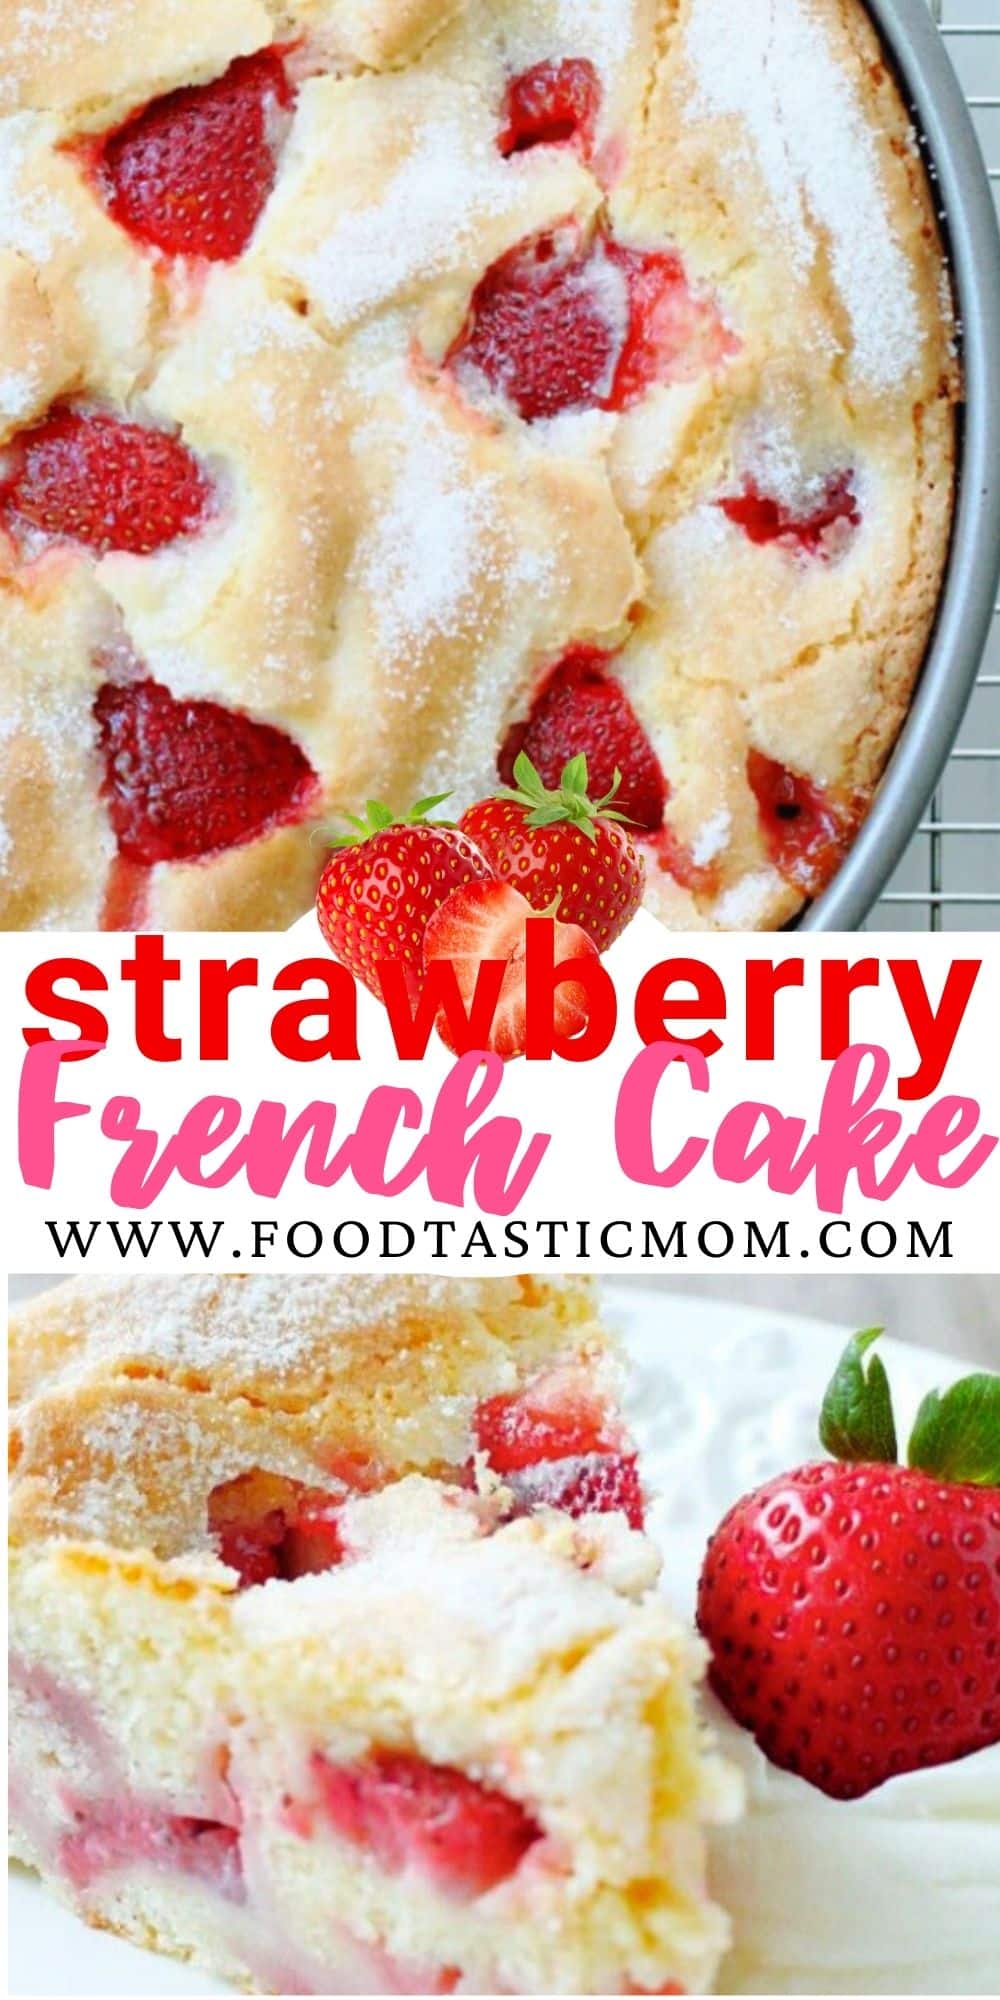 You are in for a treat with this French Strawberry Cake. Mixed in one bowl with the season's freshest strawberries, this cake bakes up with a custardy middle and crackly, sugary top. This cake has thousands of fans. via @foodtasticmom